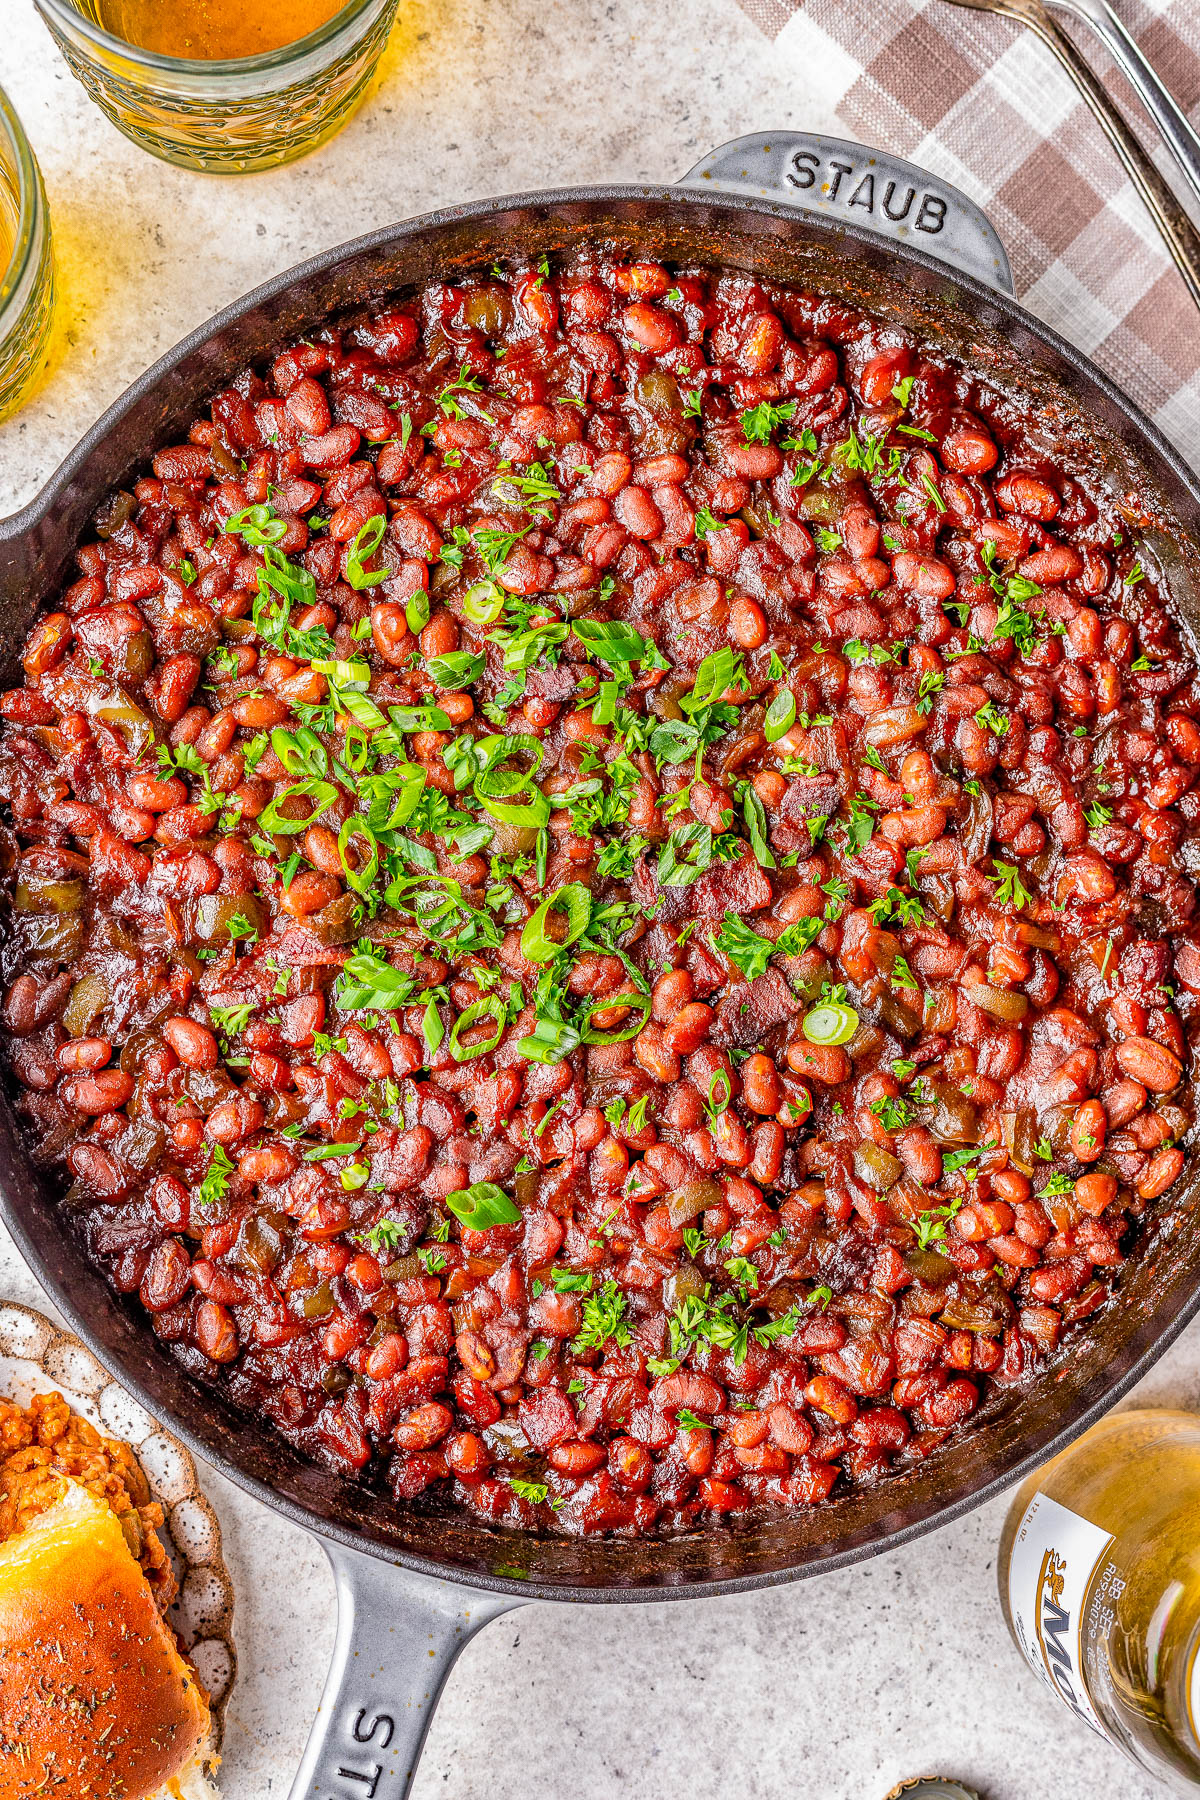 Dr Pepper Baked Beans - Not just any baked beans, these EASY baked beans with bacon, onions and peppers, also have Dr Pepper to give them FANTASTIC depth of flavor! Sweet-and-tangy, savory, hearty, and your NEW favorite baked beans recipe! Great side dish to serve at backyard barbecues, summer holidays, tailgating and game day parties, or anytime you need a comfort food recipe!